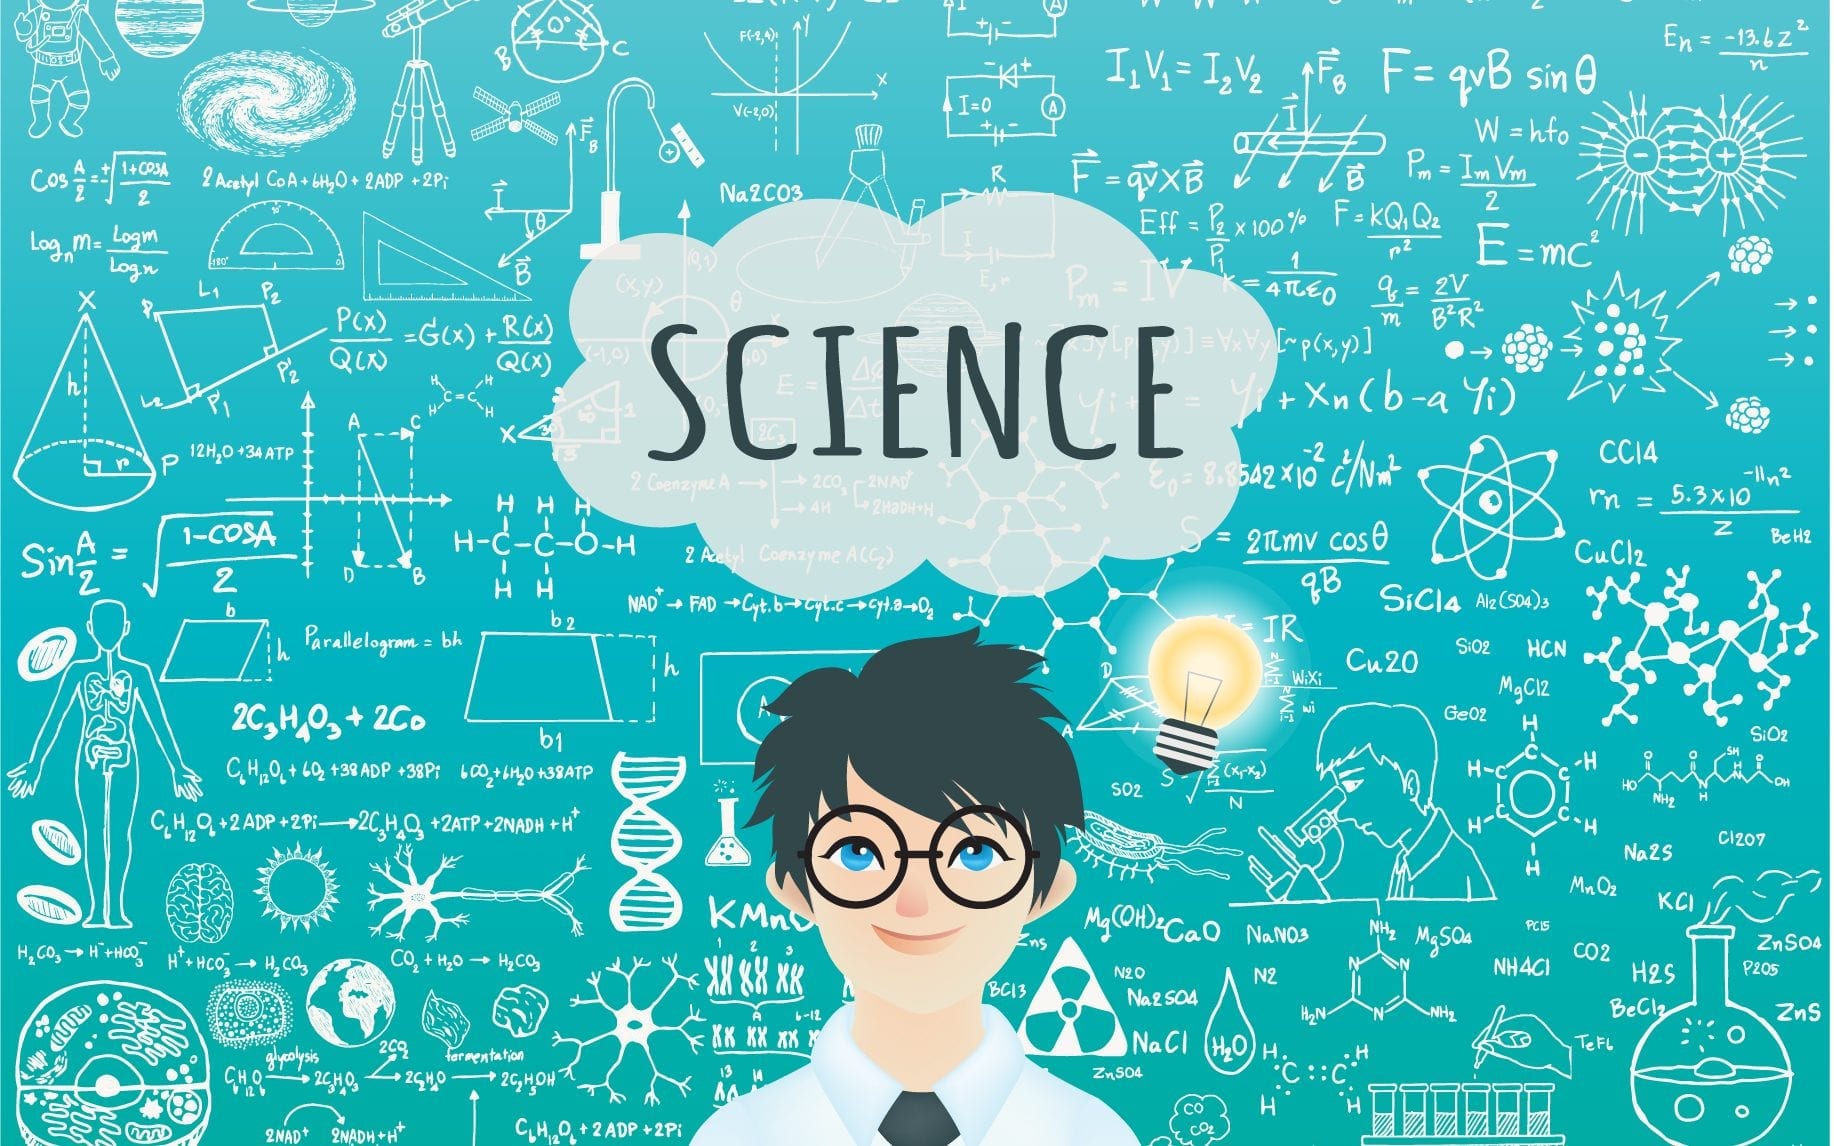 20 Motivational Science Quotes by the Greatest Scientists - Leverage Edu